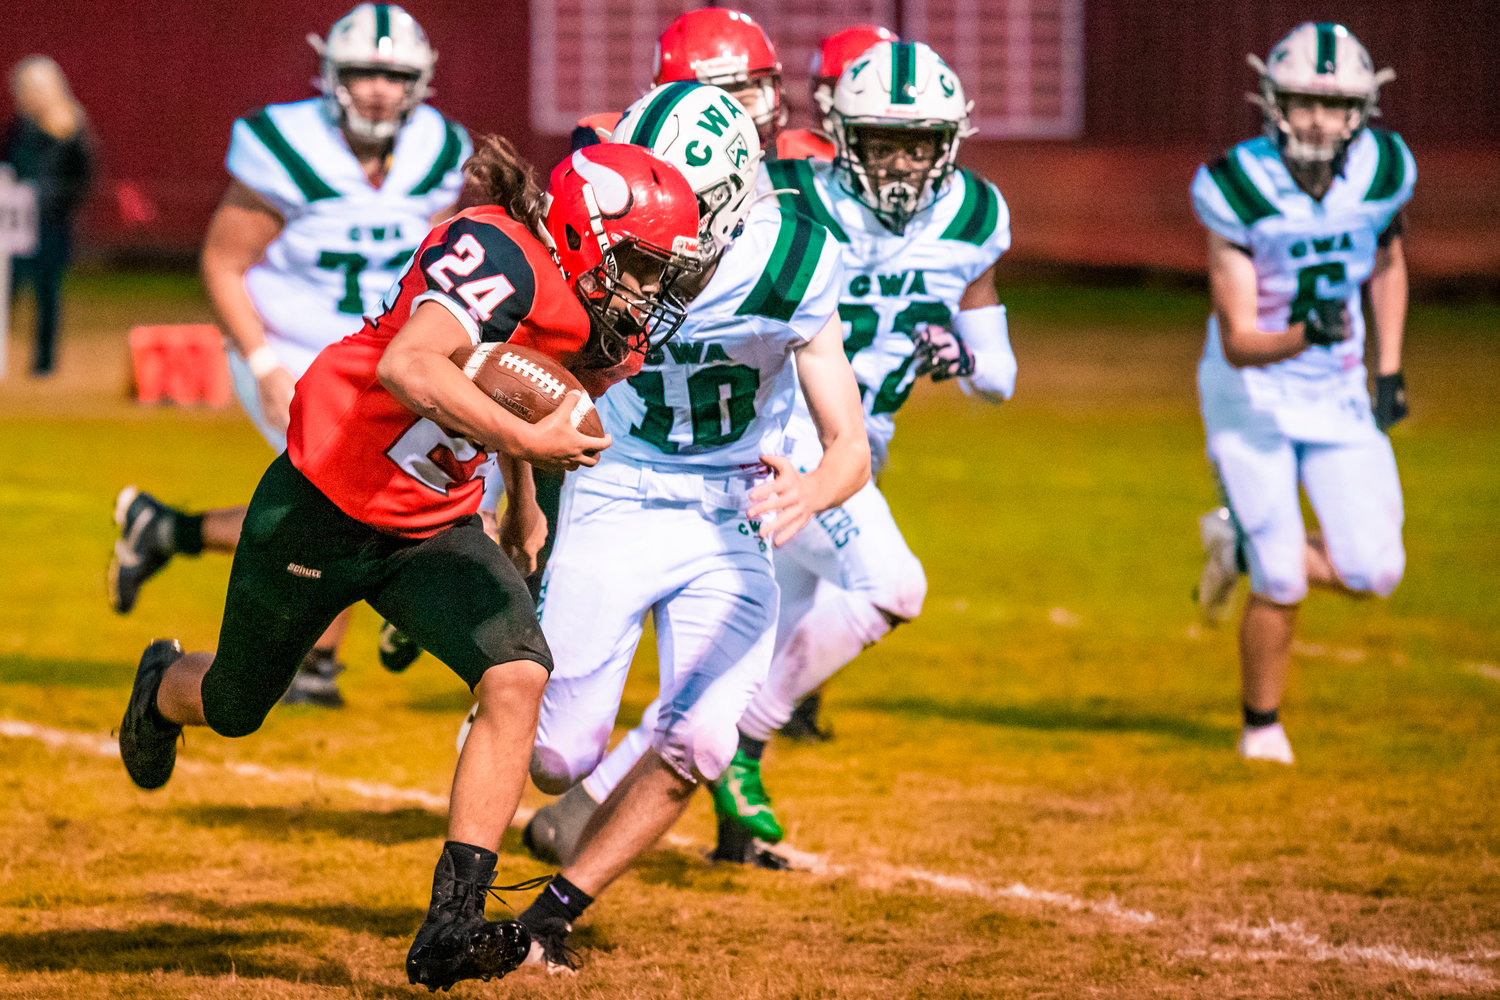 Mossyrock’s Sage Greisen (24) runs past defenders with the football during a home game Friday night.